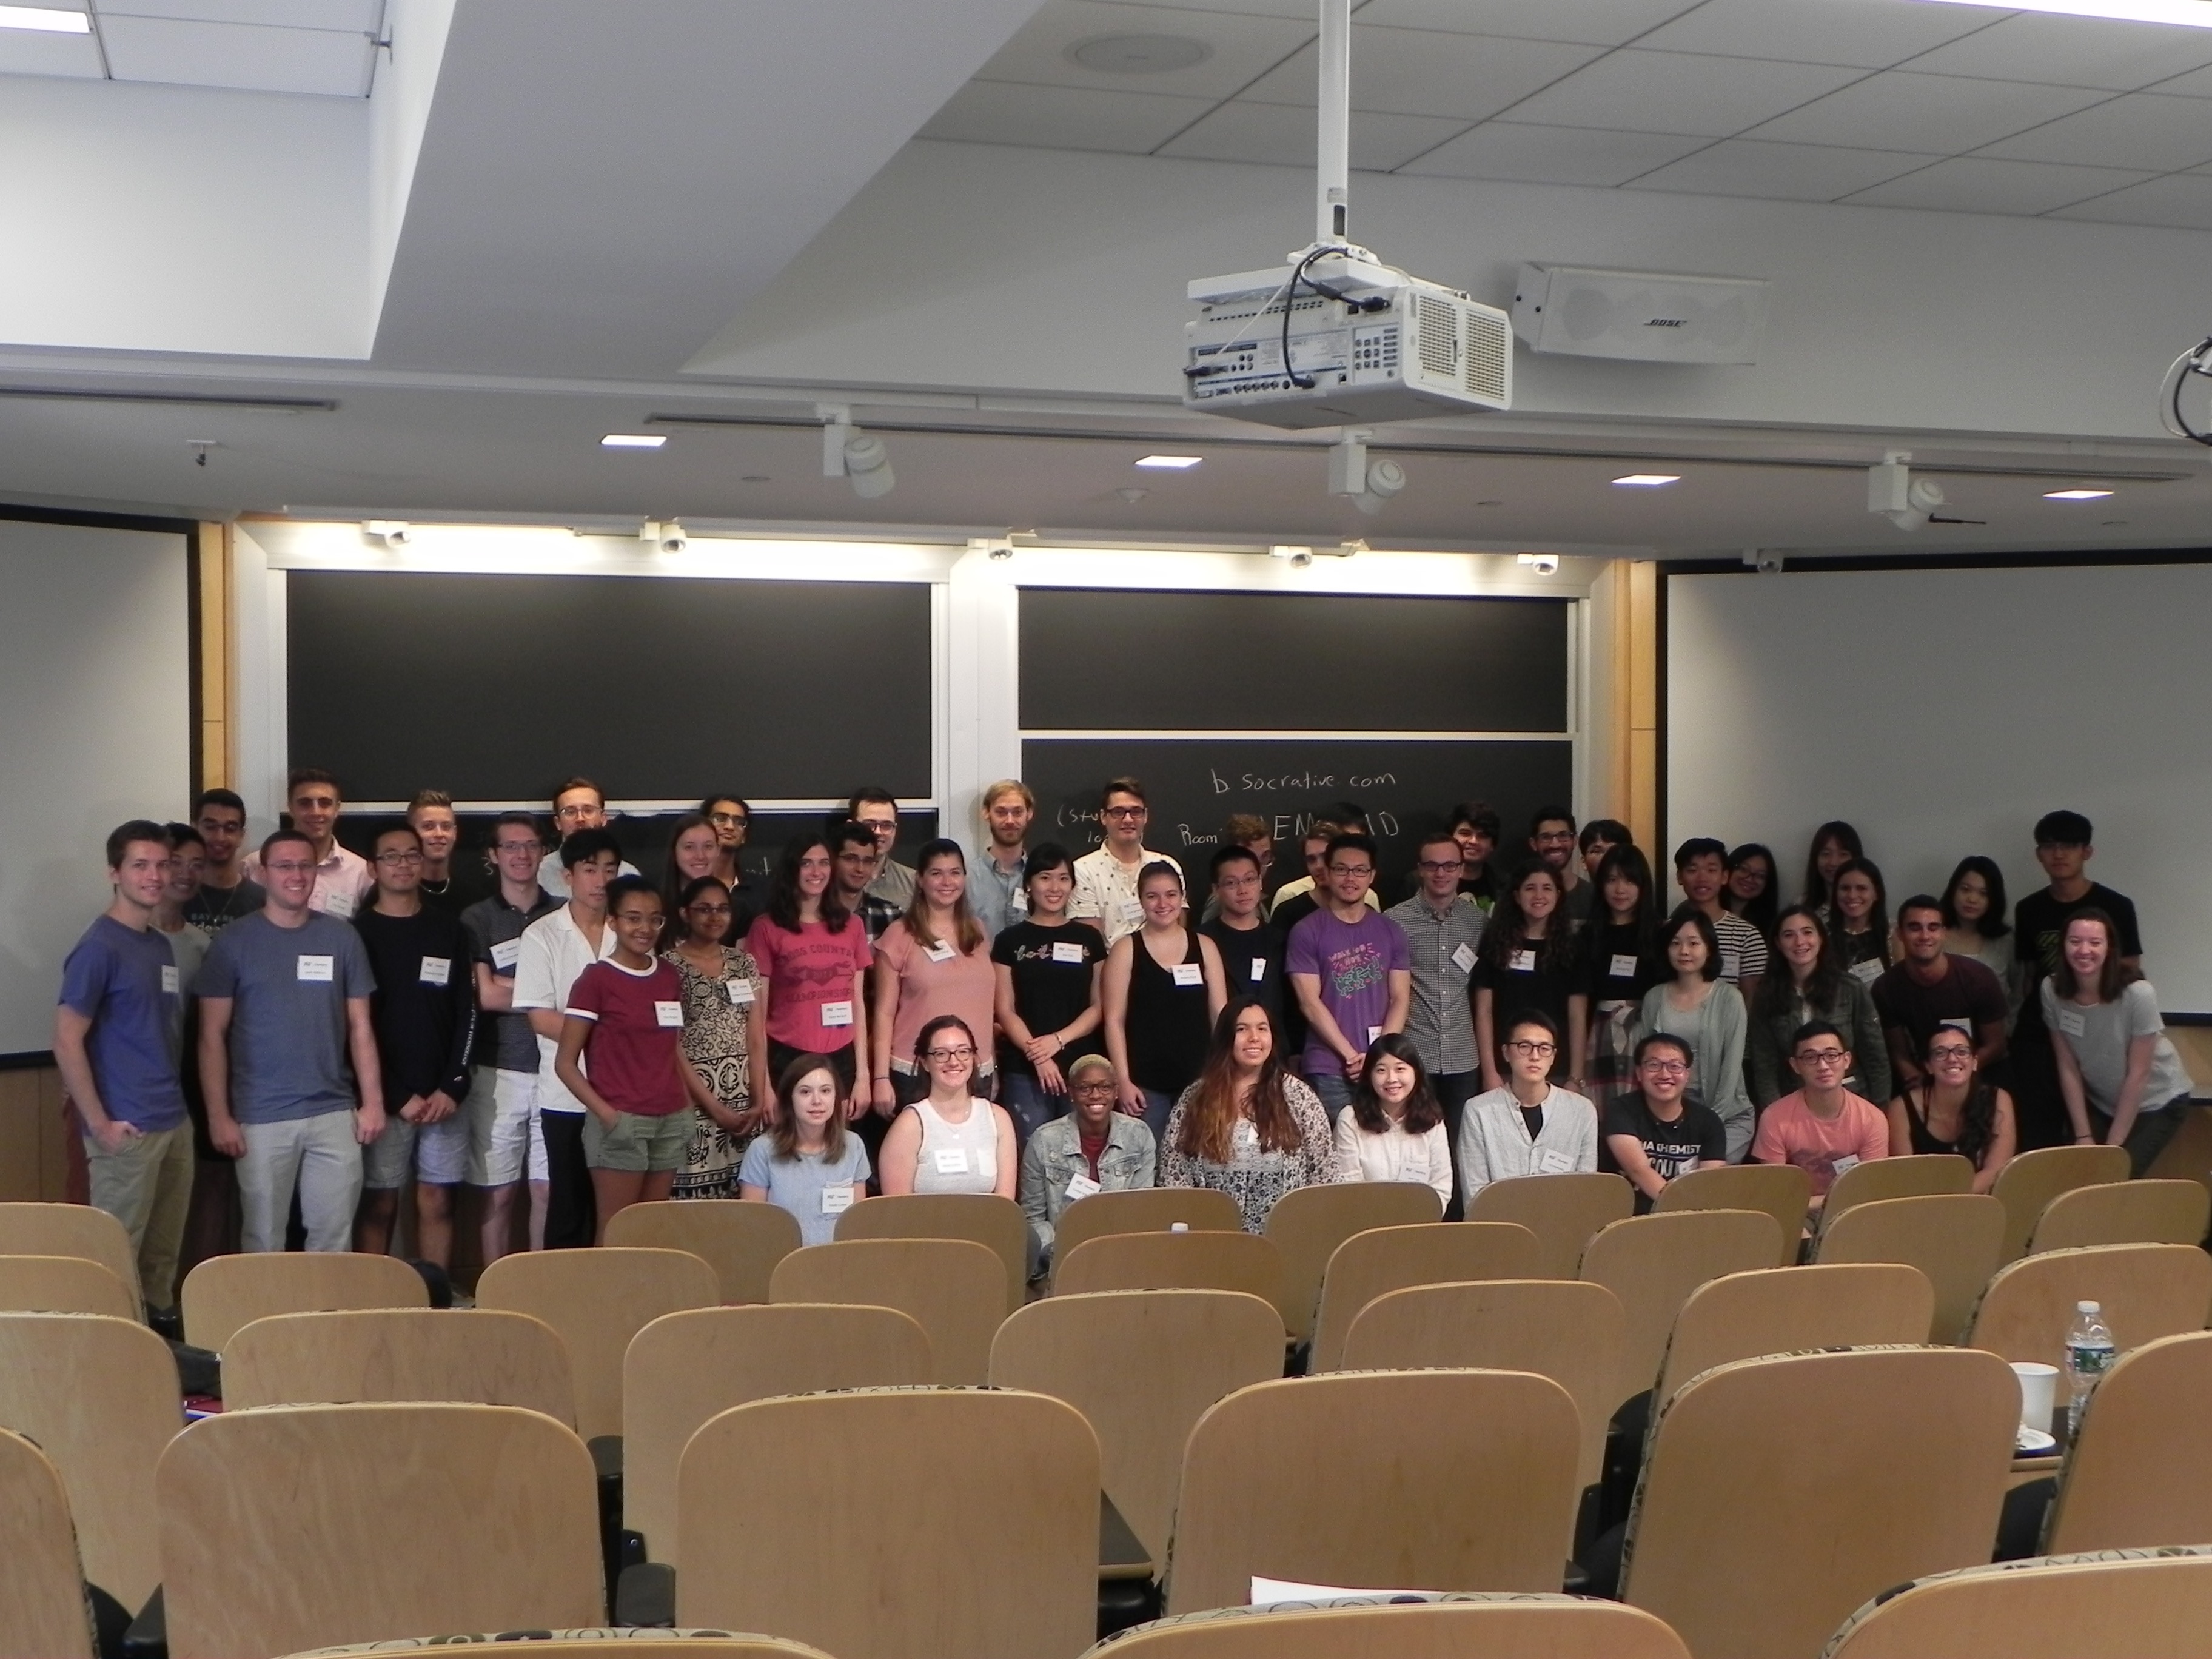 Group photo of first year graduate students standing in a lecture hall